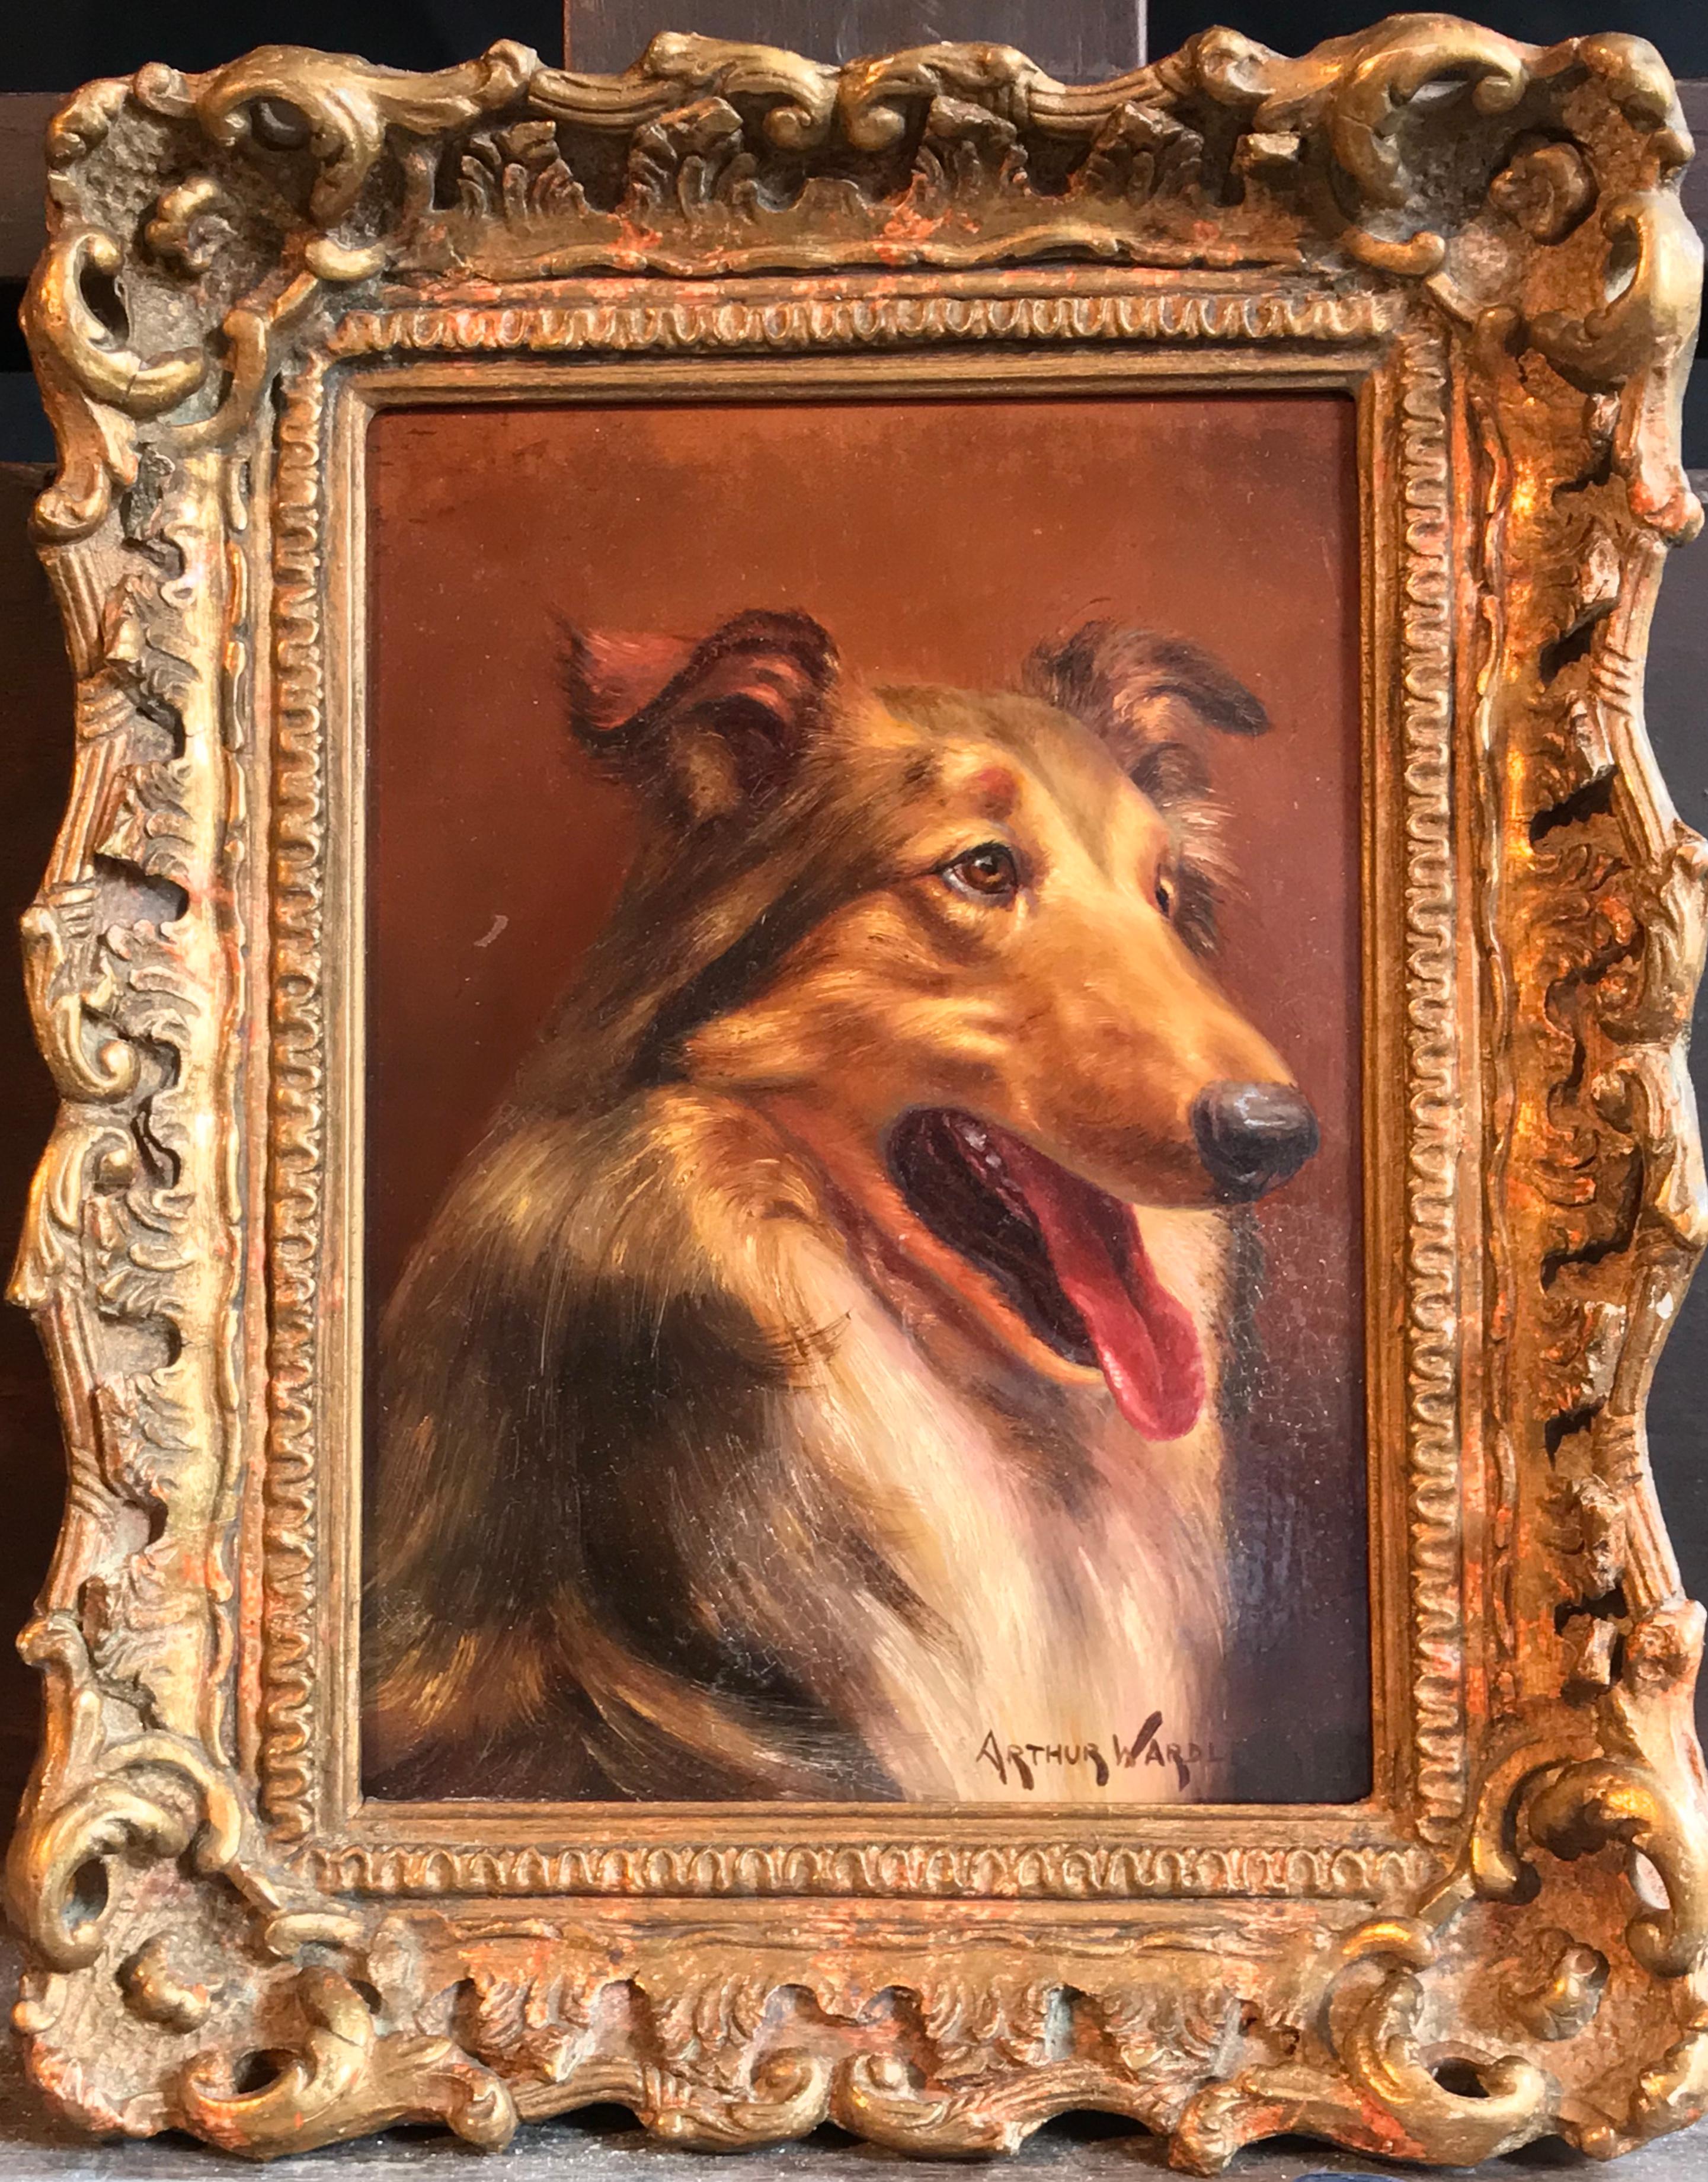 Portrait of a Collie Dog, signed original oil painting - Painting by Arthur Wardle